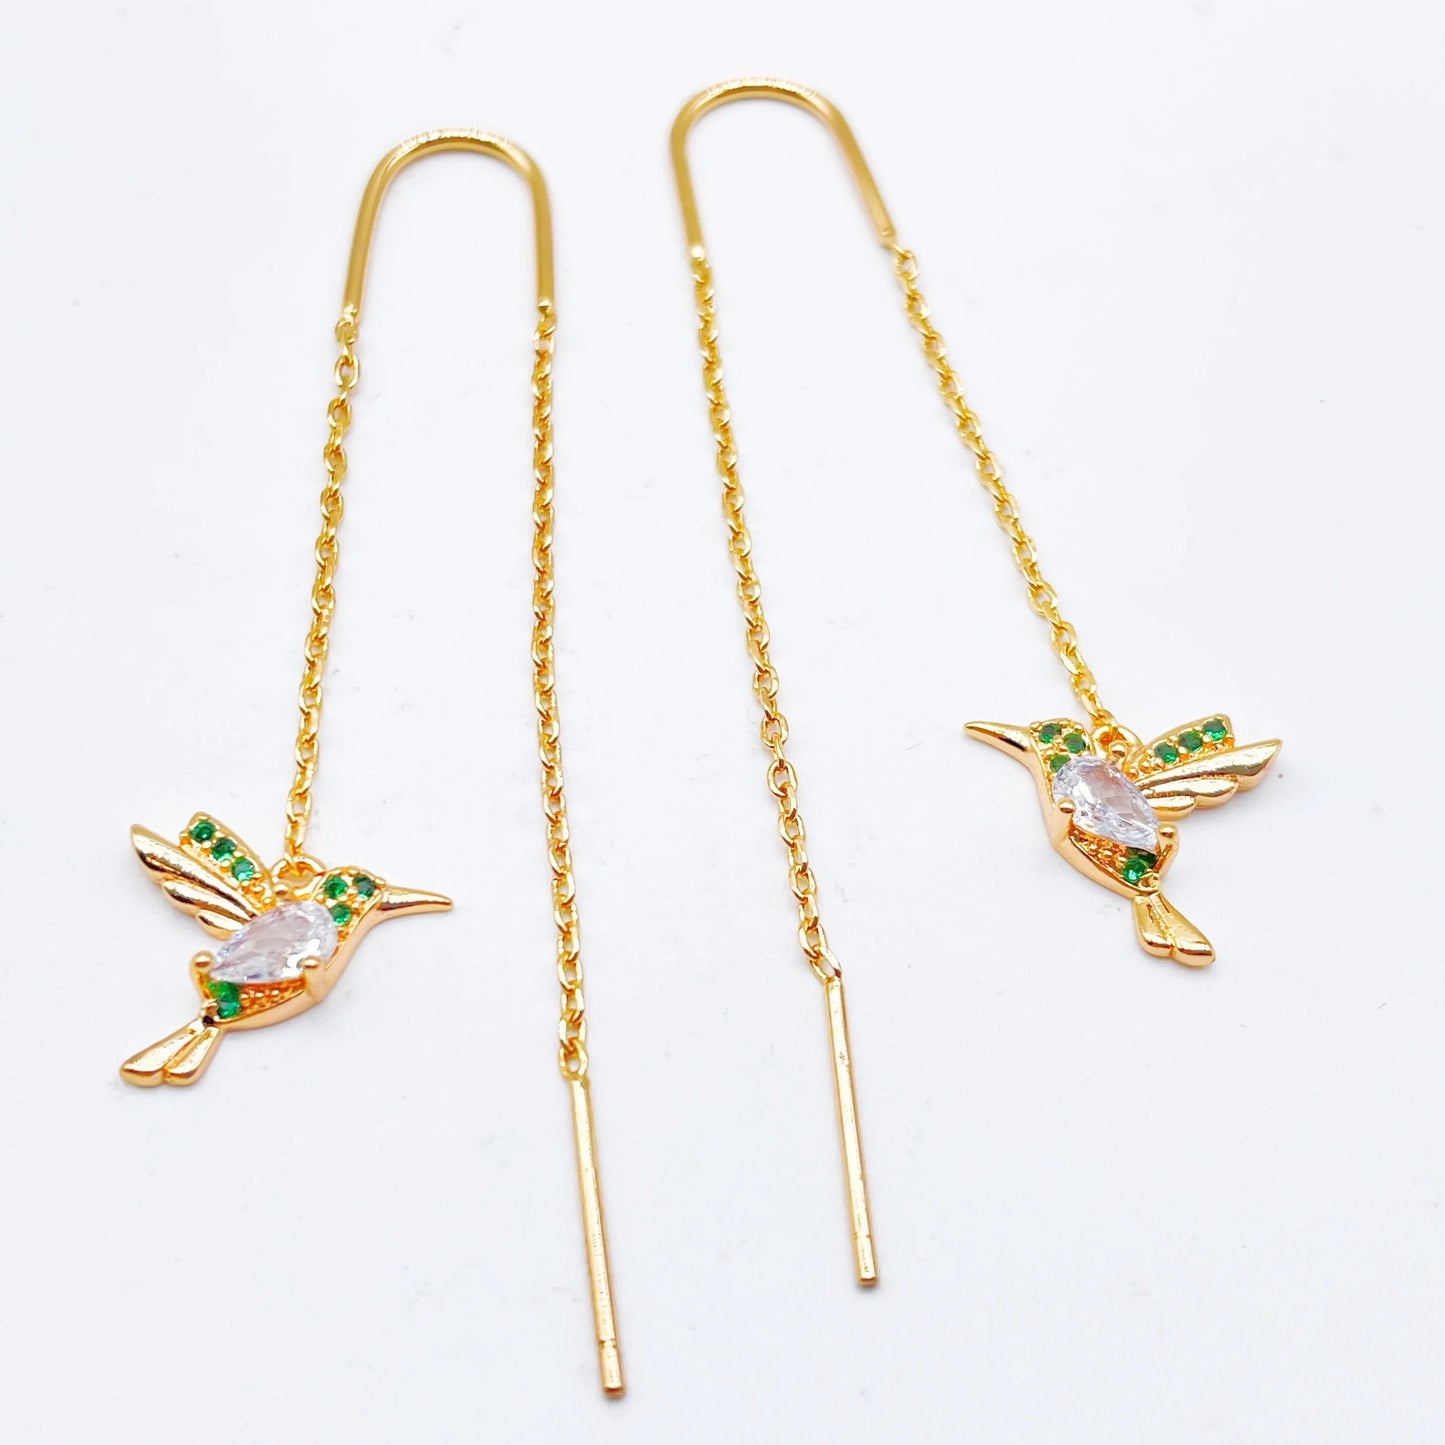 Hot Fashion Cute 585 Rose Gold Long Line Chain Women Various Mini Lovely Bird Tassel Pet Earrings Adjustable Exclusive Jewelry